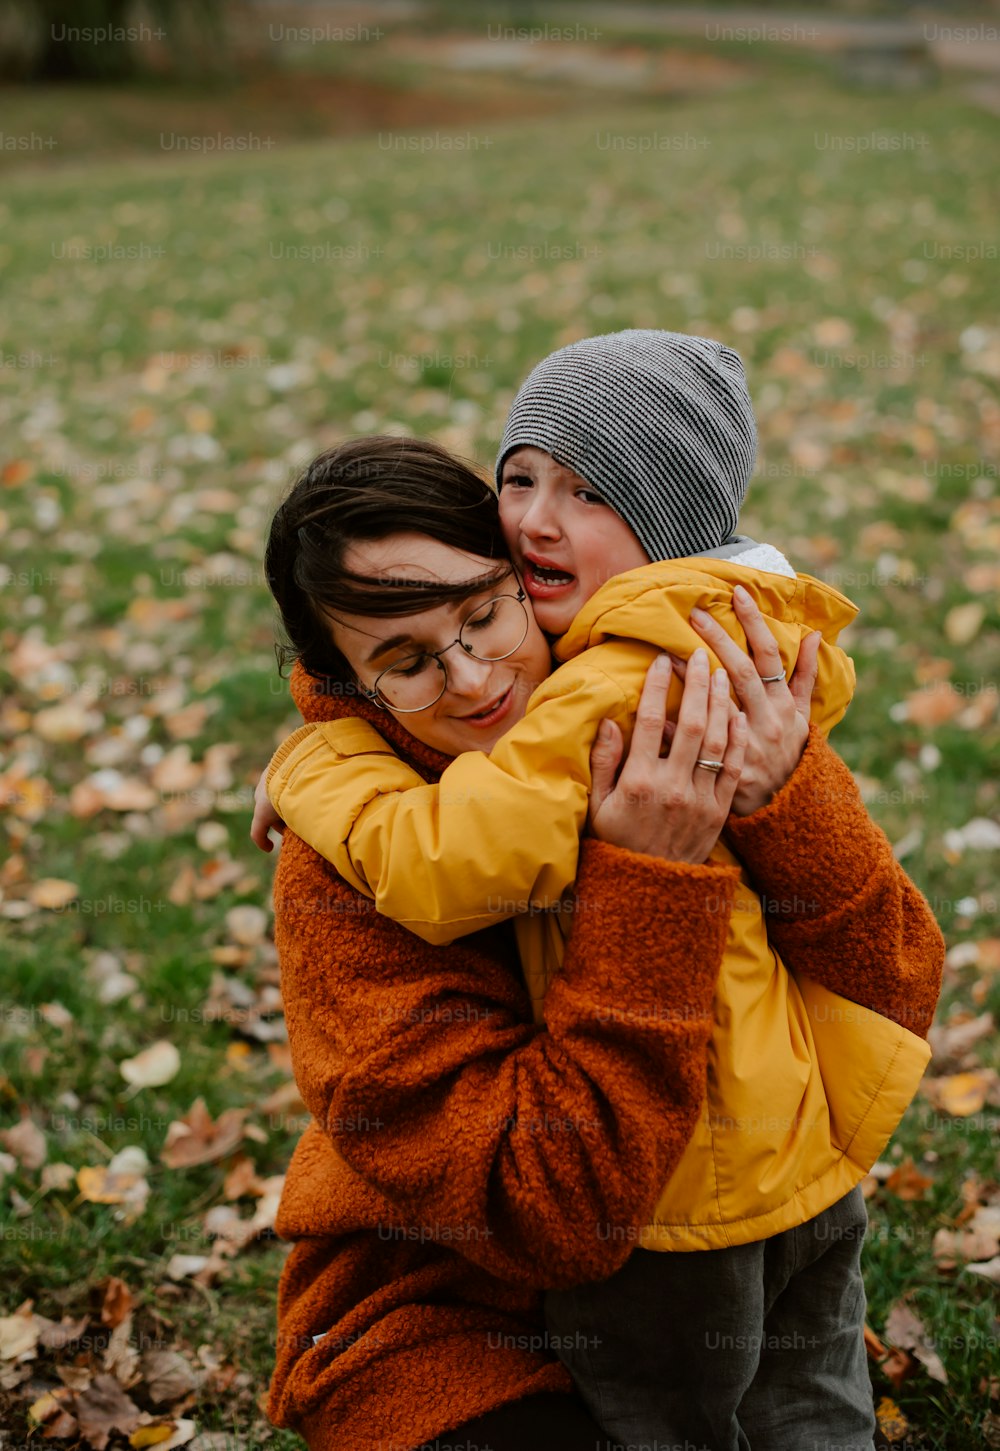 two women hugging each other in a field of leaves